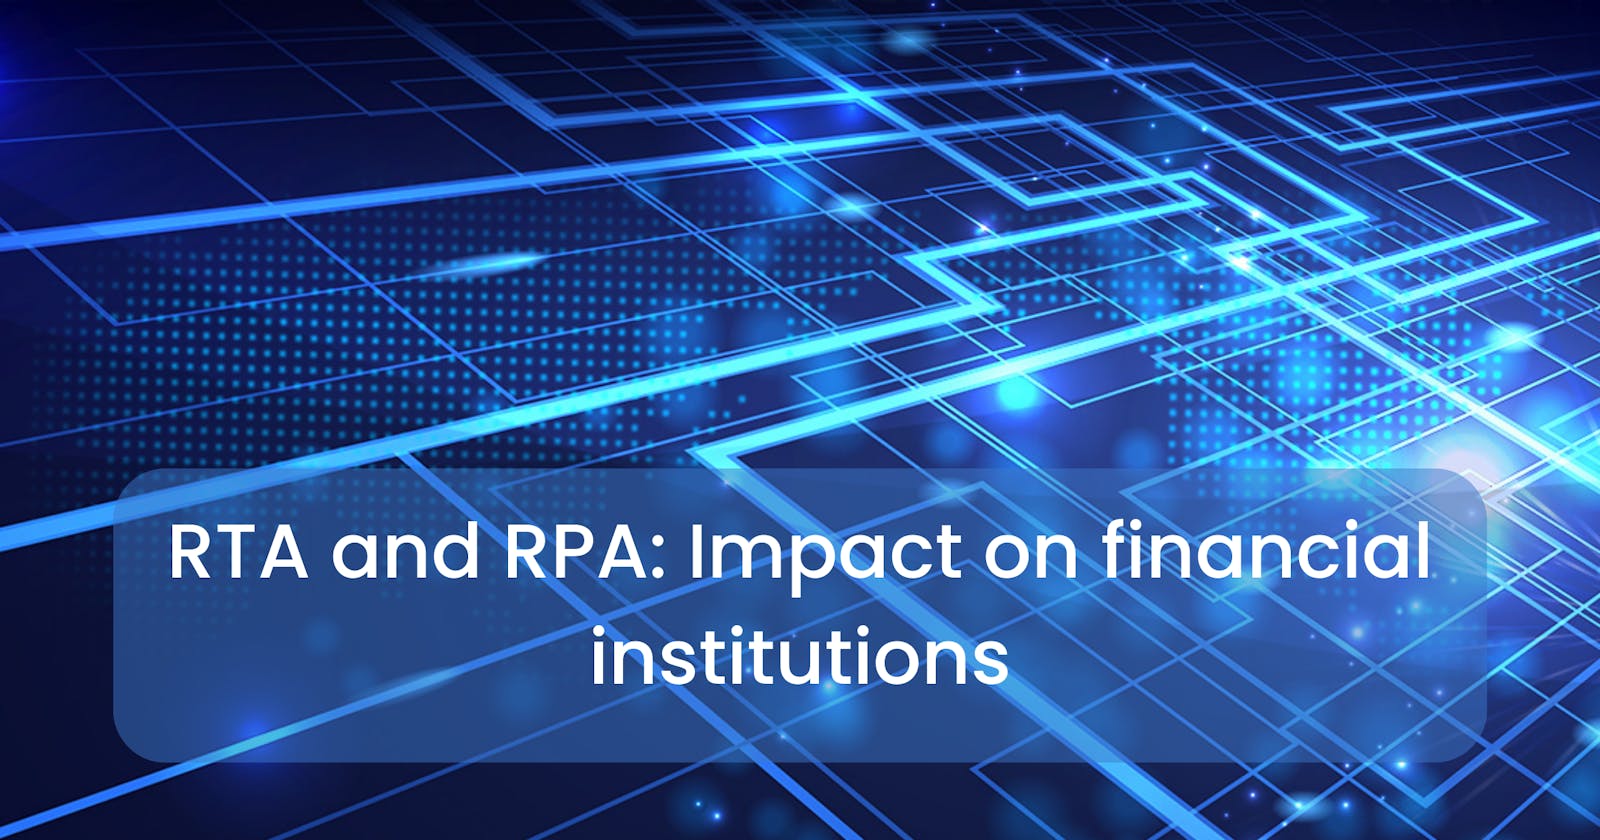 RTA and RPA: Impact on financial institutions